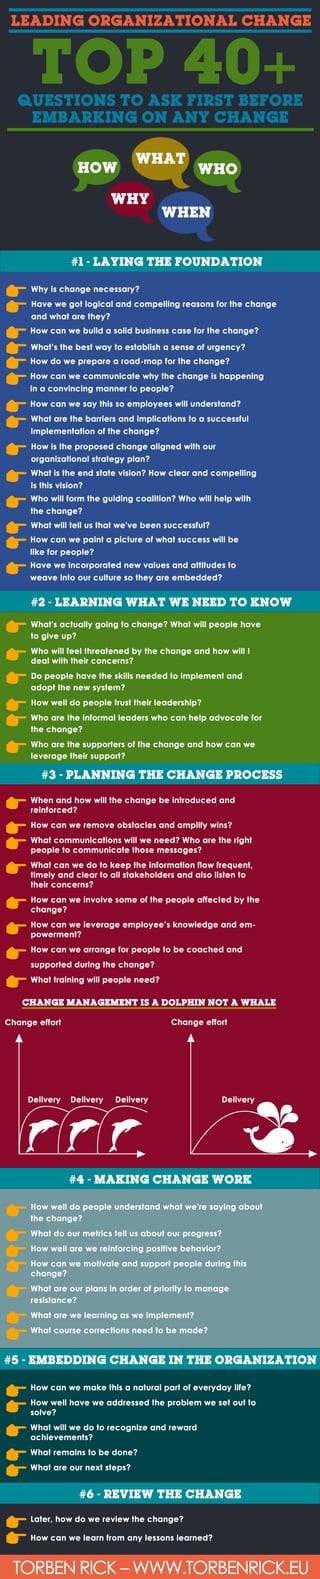 Top 40+ questions to ask before embarking on any change management